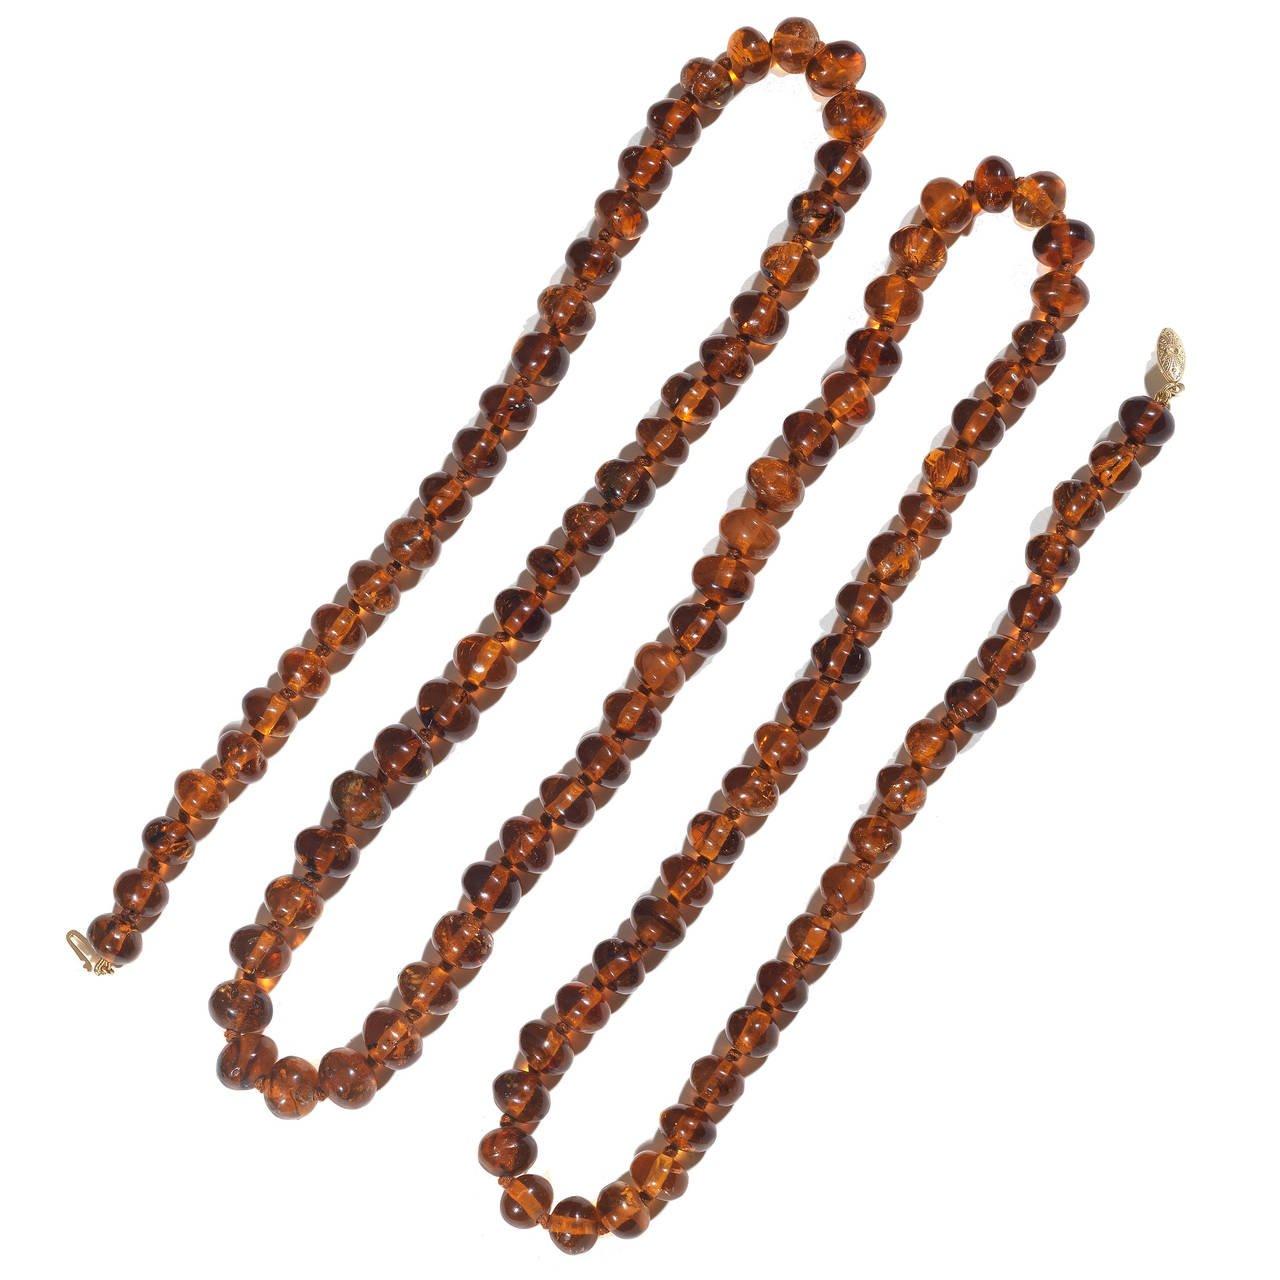 SHIPPING POLICY:
No additional costs will be added to this order.
Shipping costs will be totally covered by the seller (customs duties included). 

The single-strand of graduated oval amber beads approx. from 12 mm to 10 mm

Engraved gold mounted